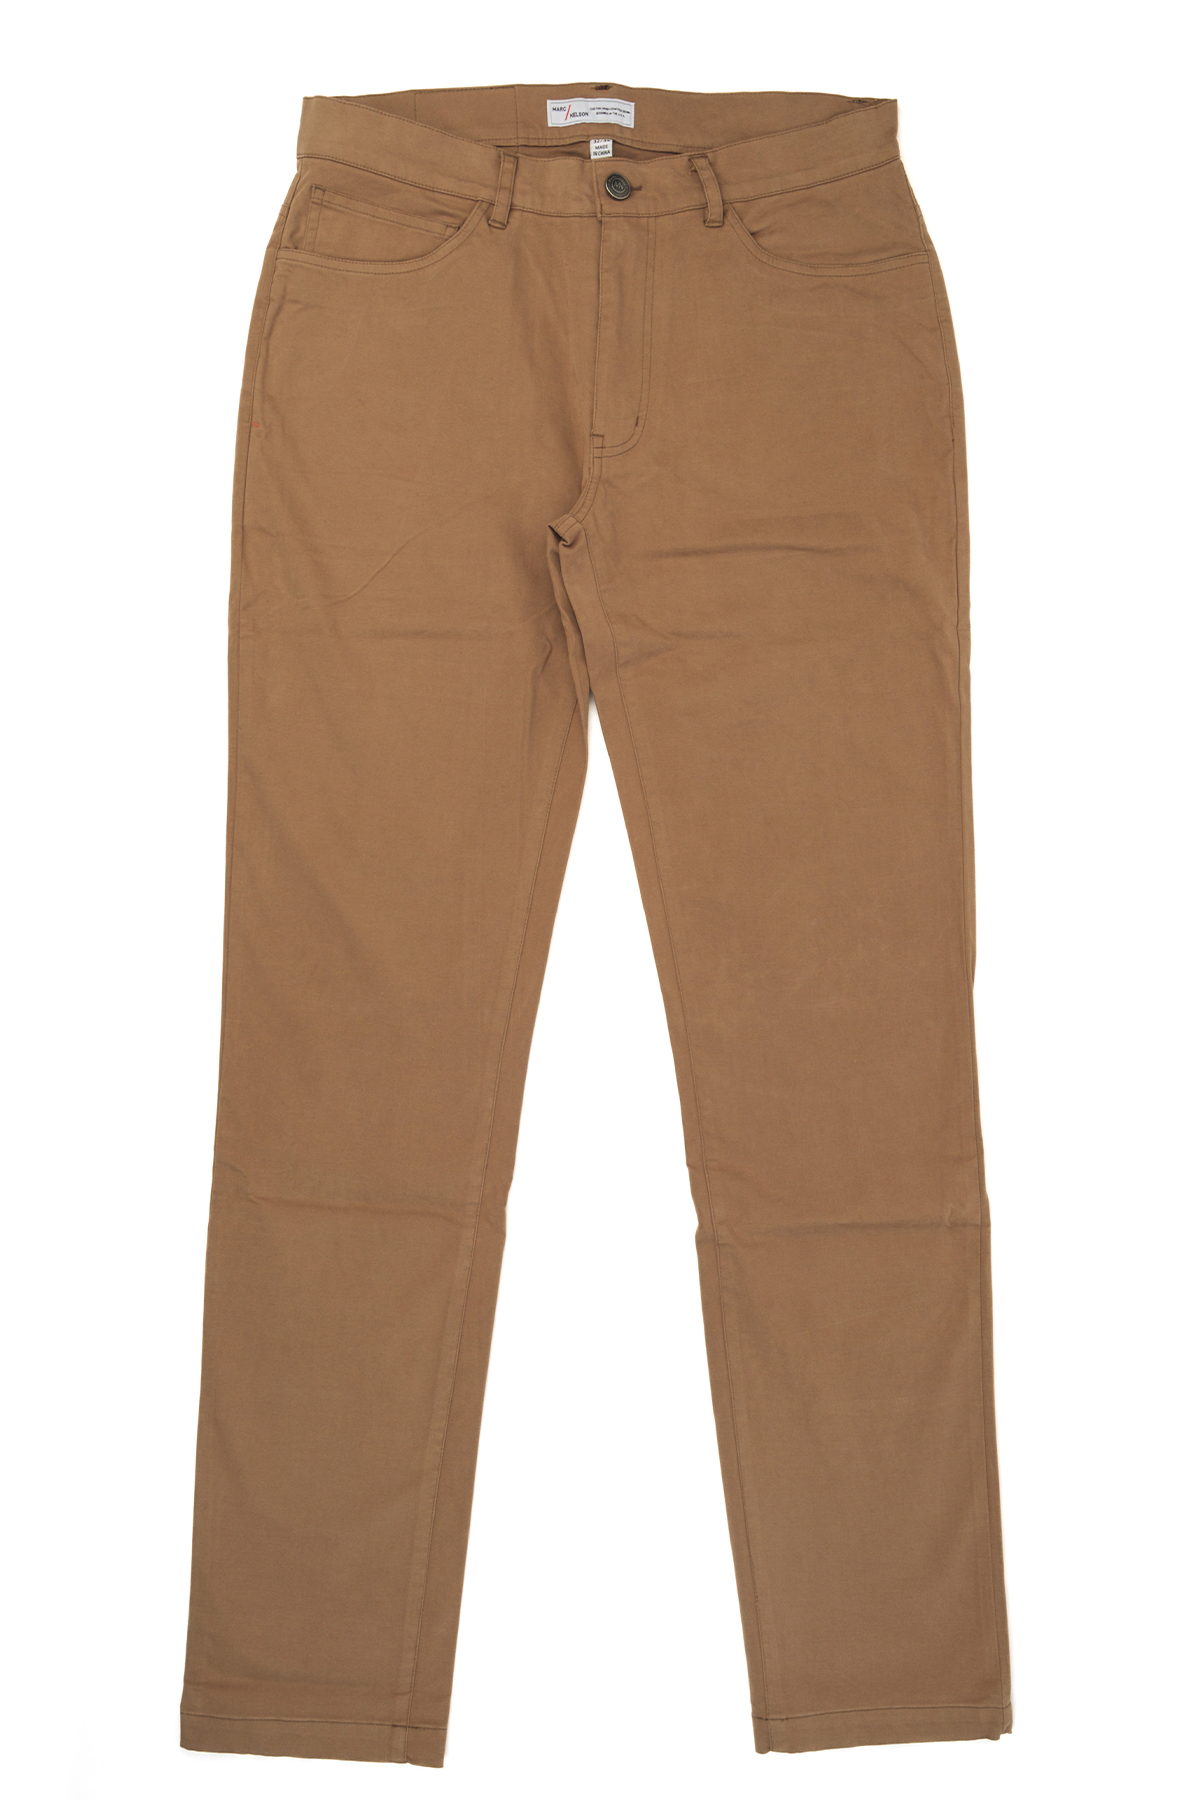 The George Buck Pant